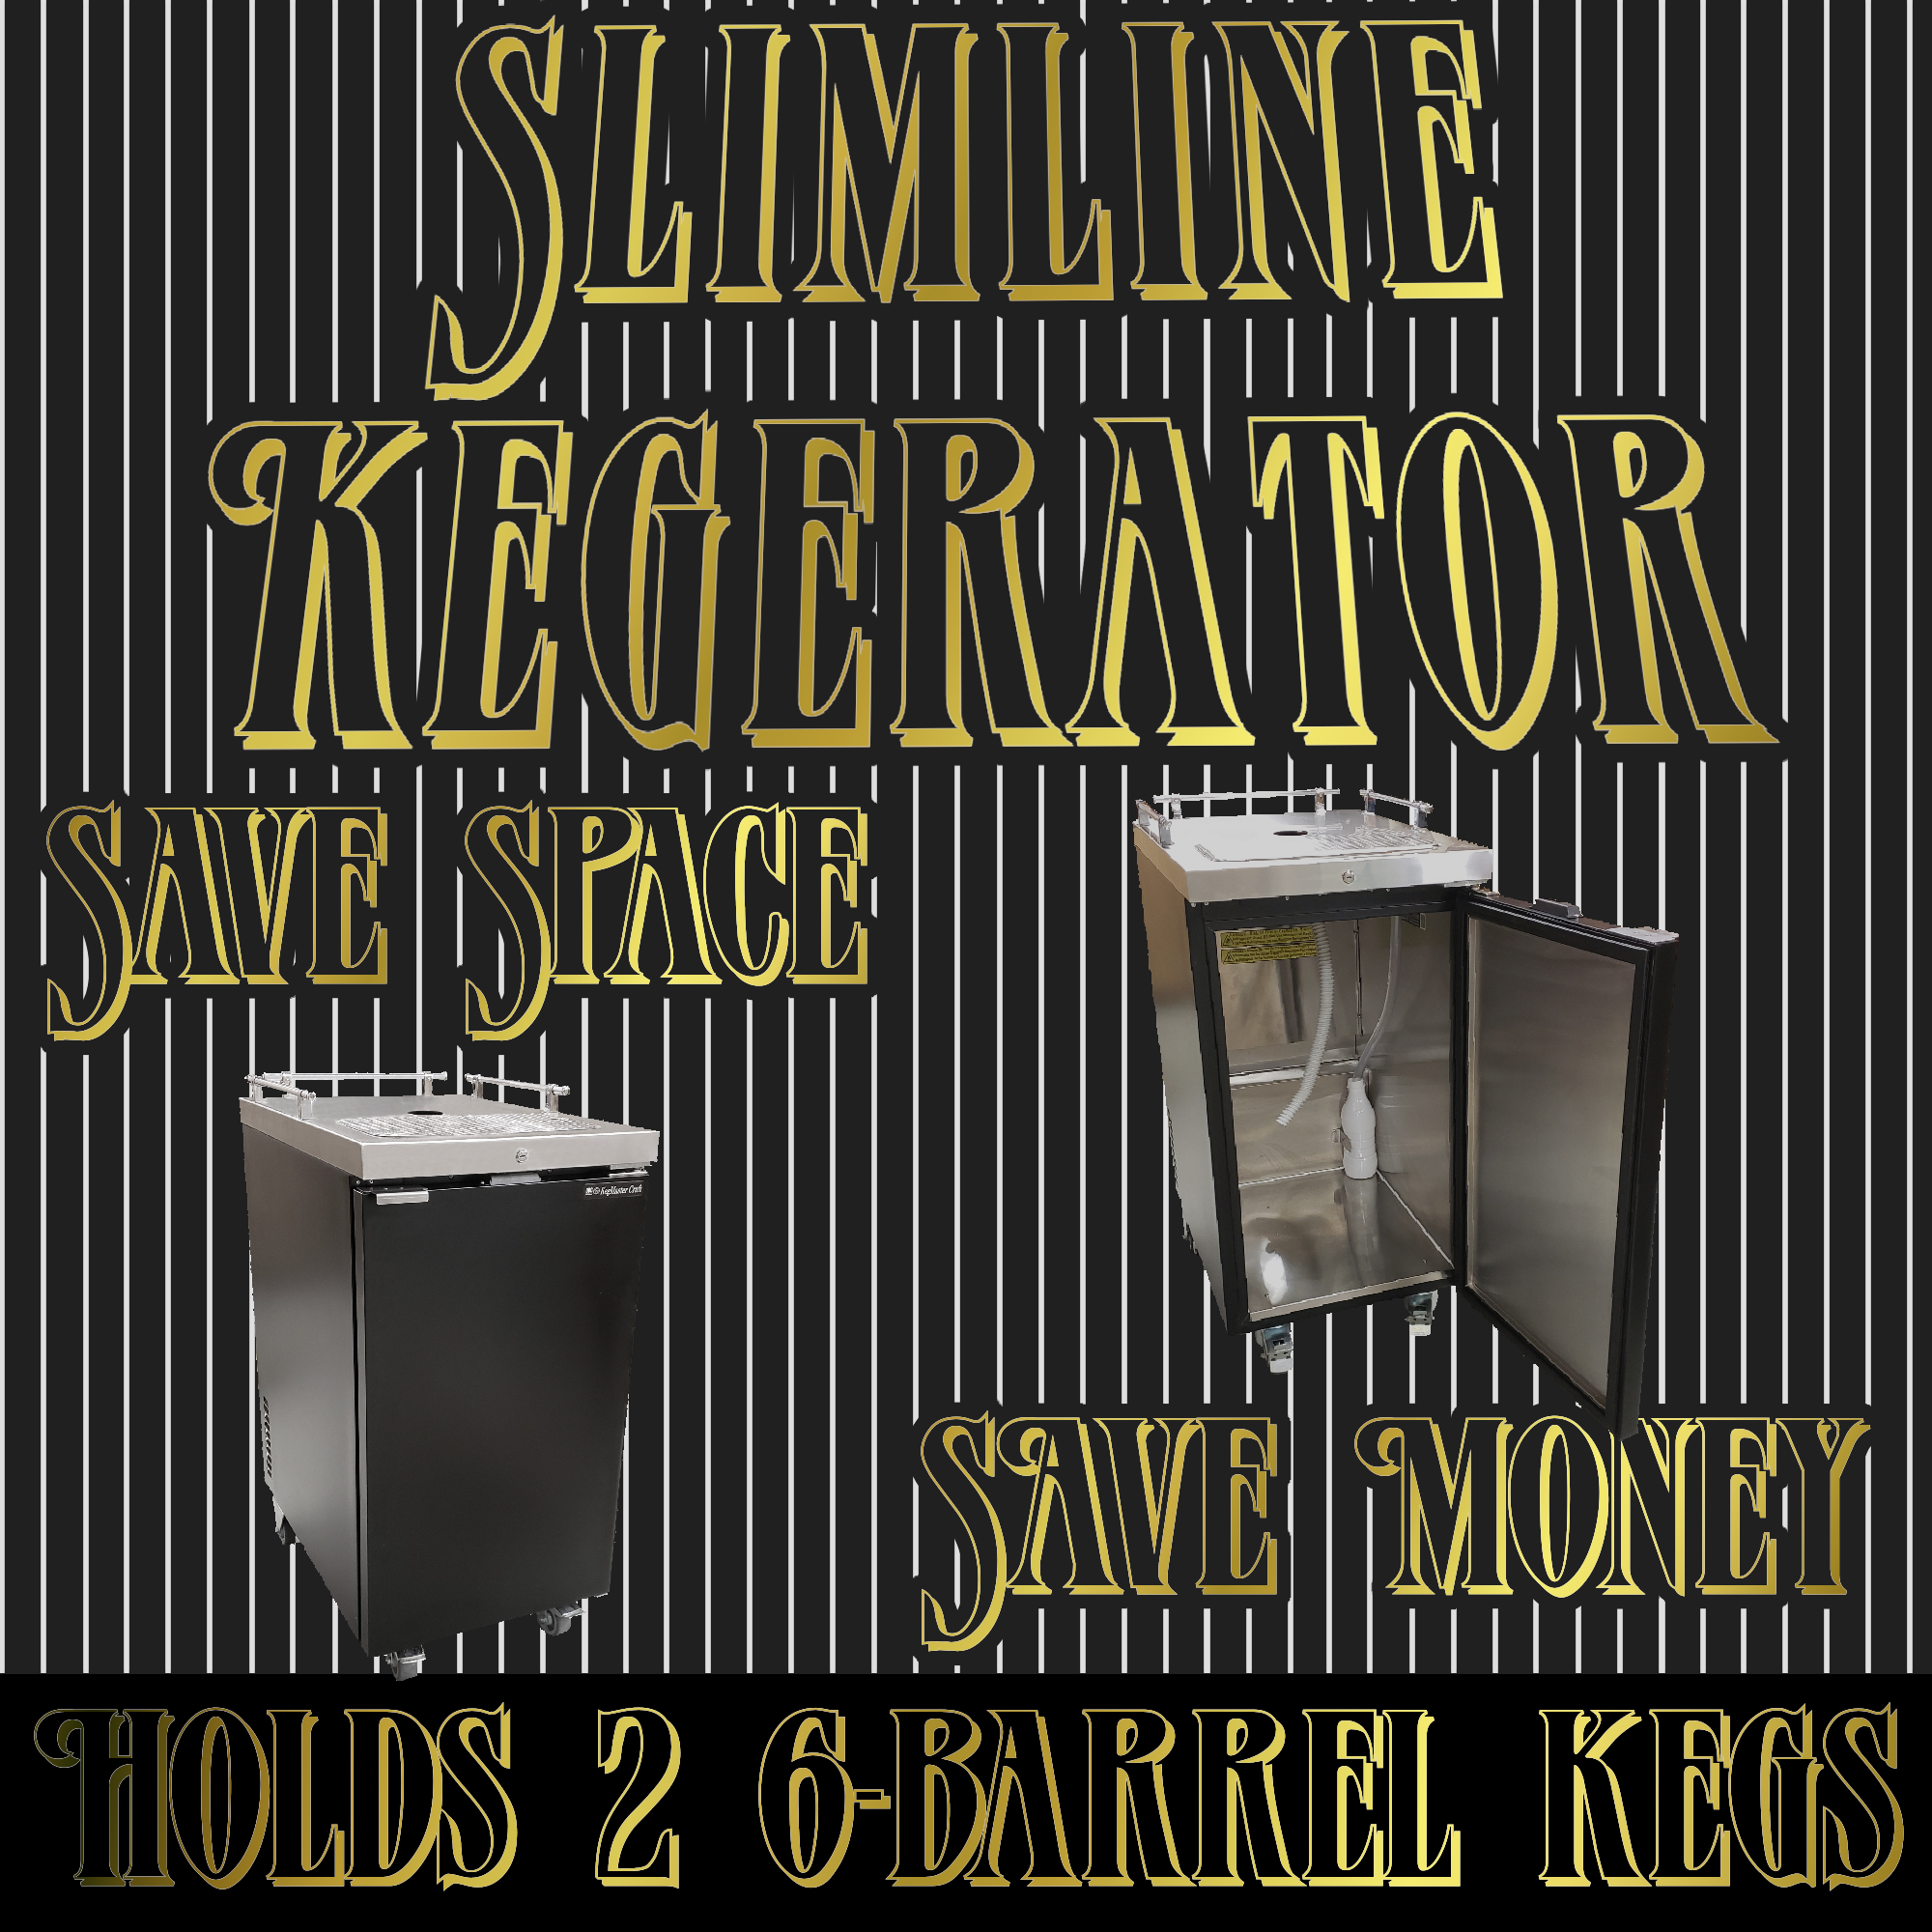 Check out the new Slimline Kegerator